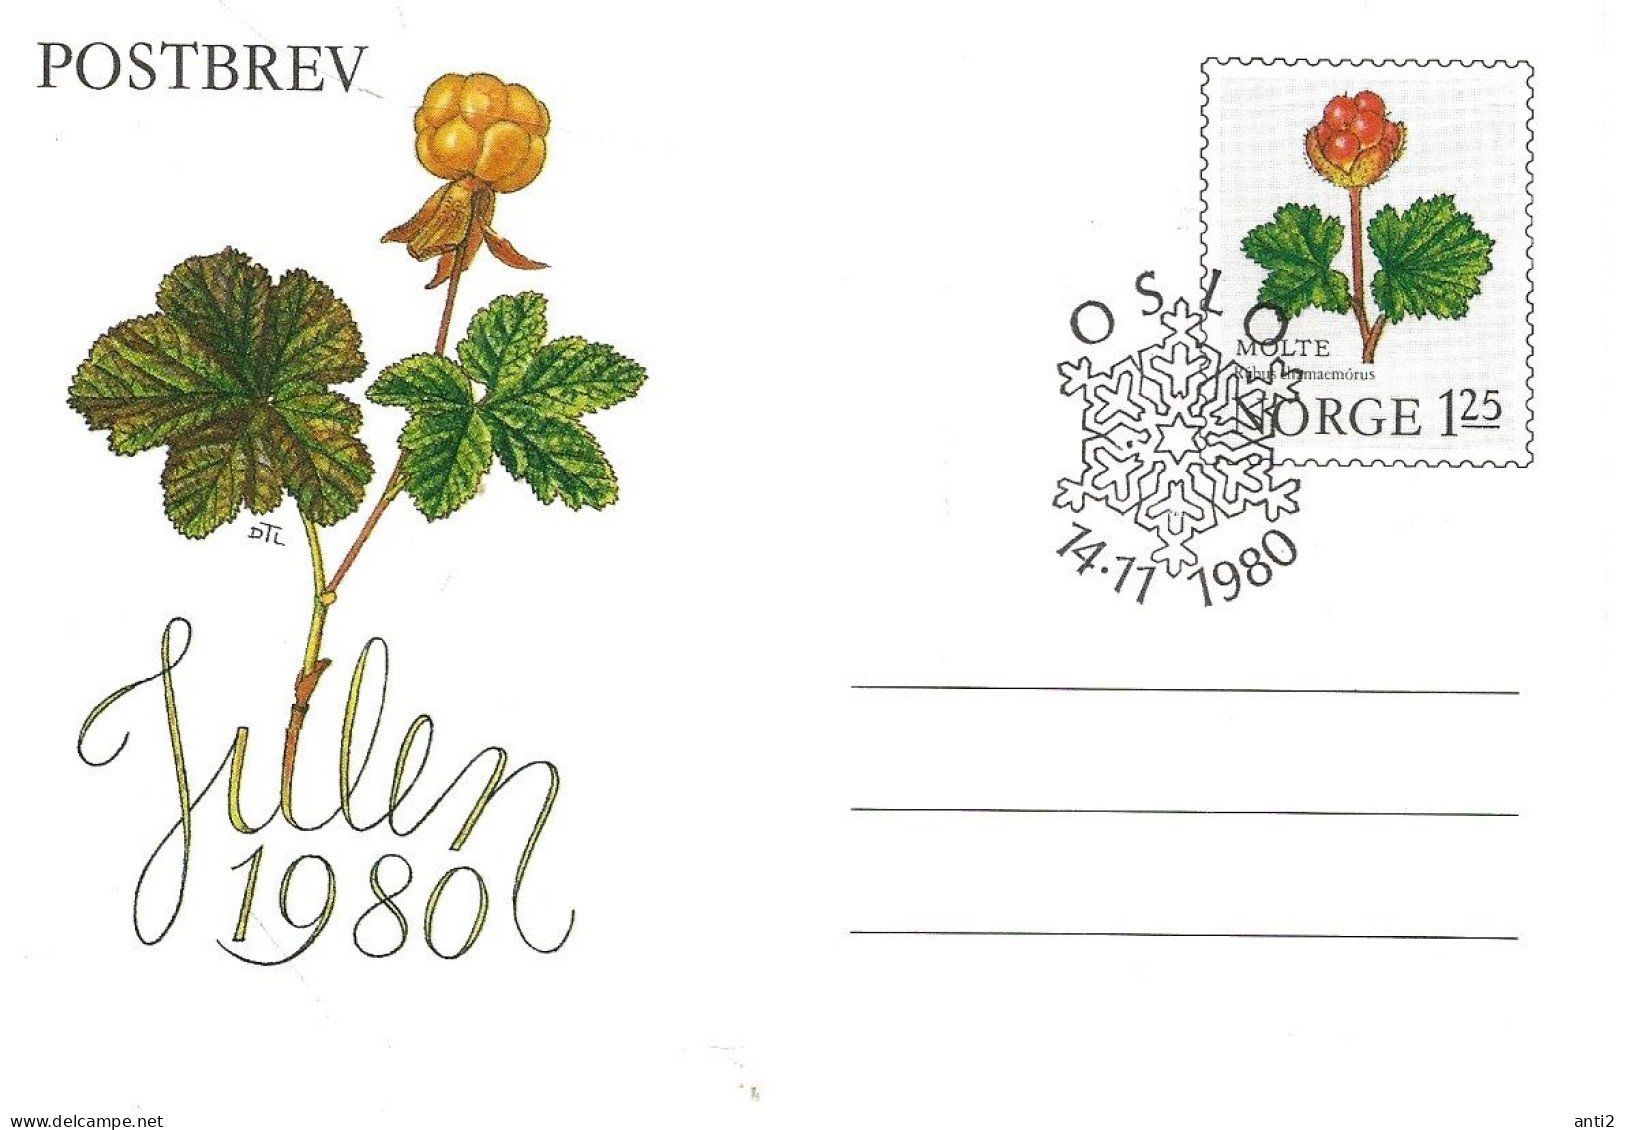 Norge Norway 1980 Stationary - Postbrev, Letter With Imprinted Stamp Special For Christmas 1980 With Ripe Berries   FDC - Cartas & Documentos